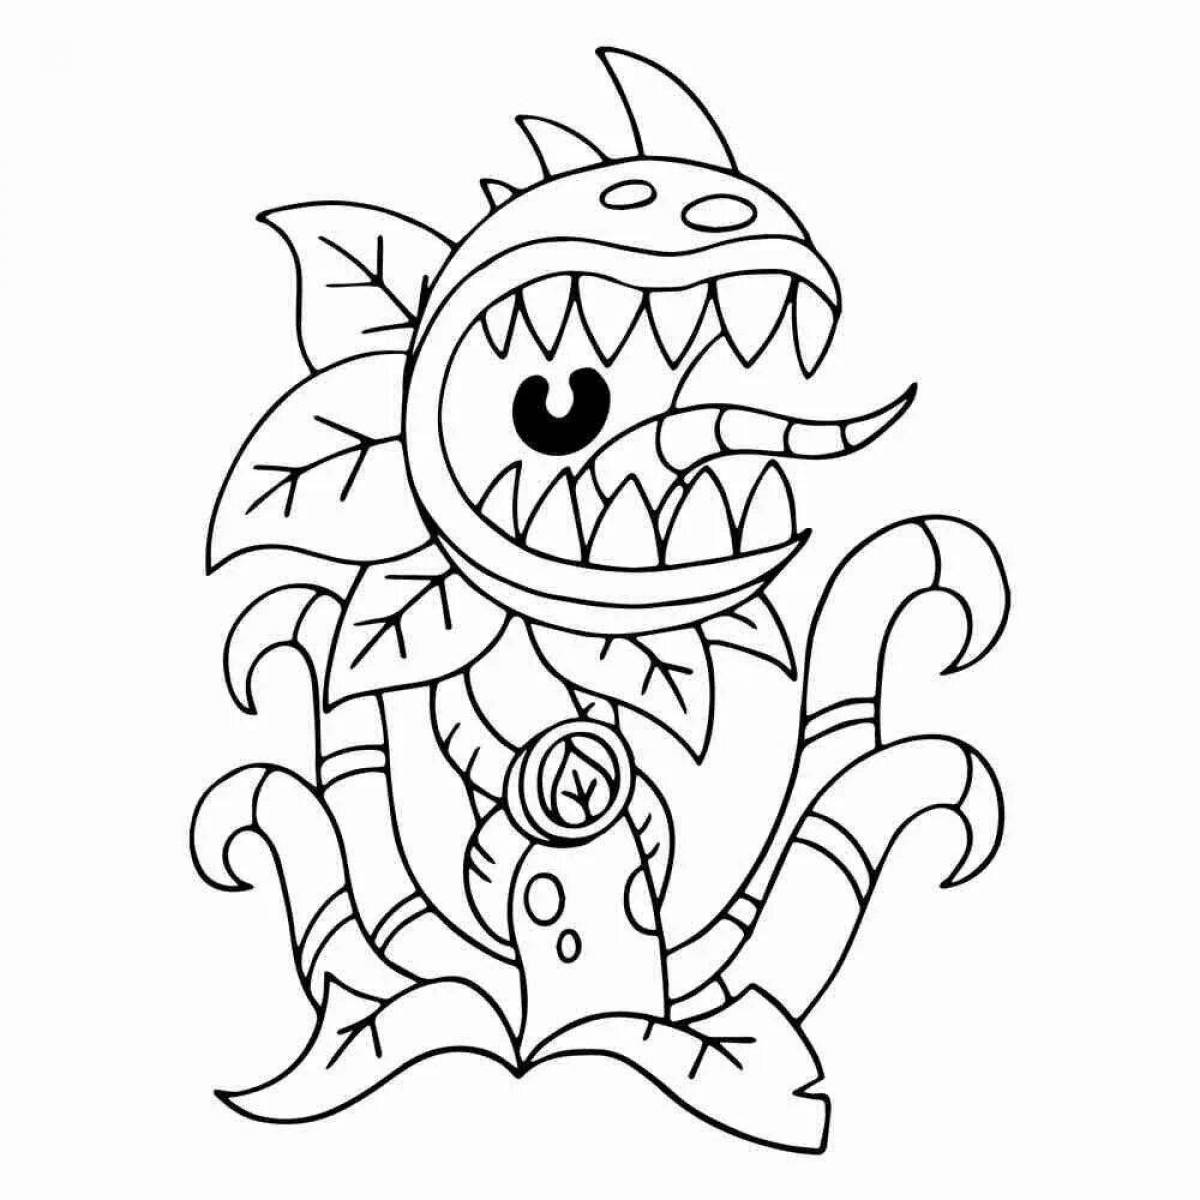 Color-frenzy coloring page plants vs zombies 2 sunflower